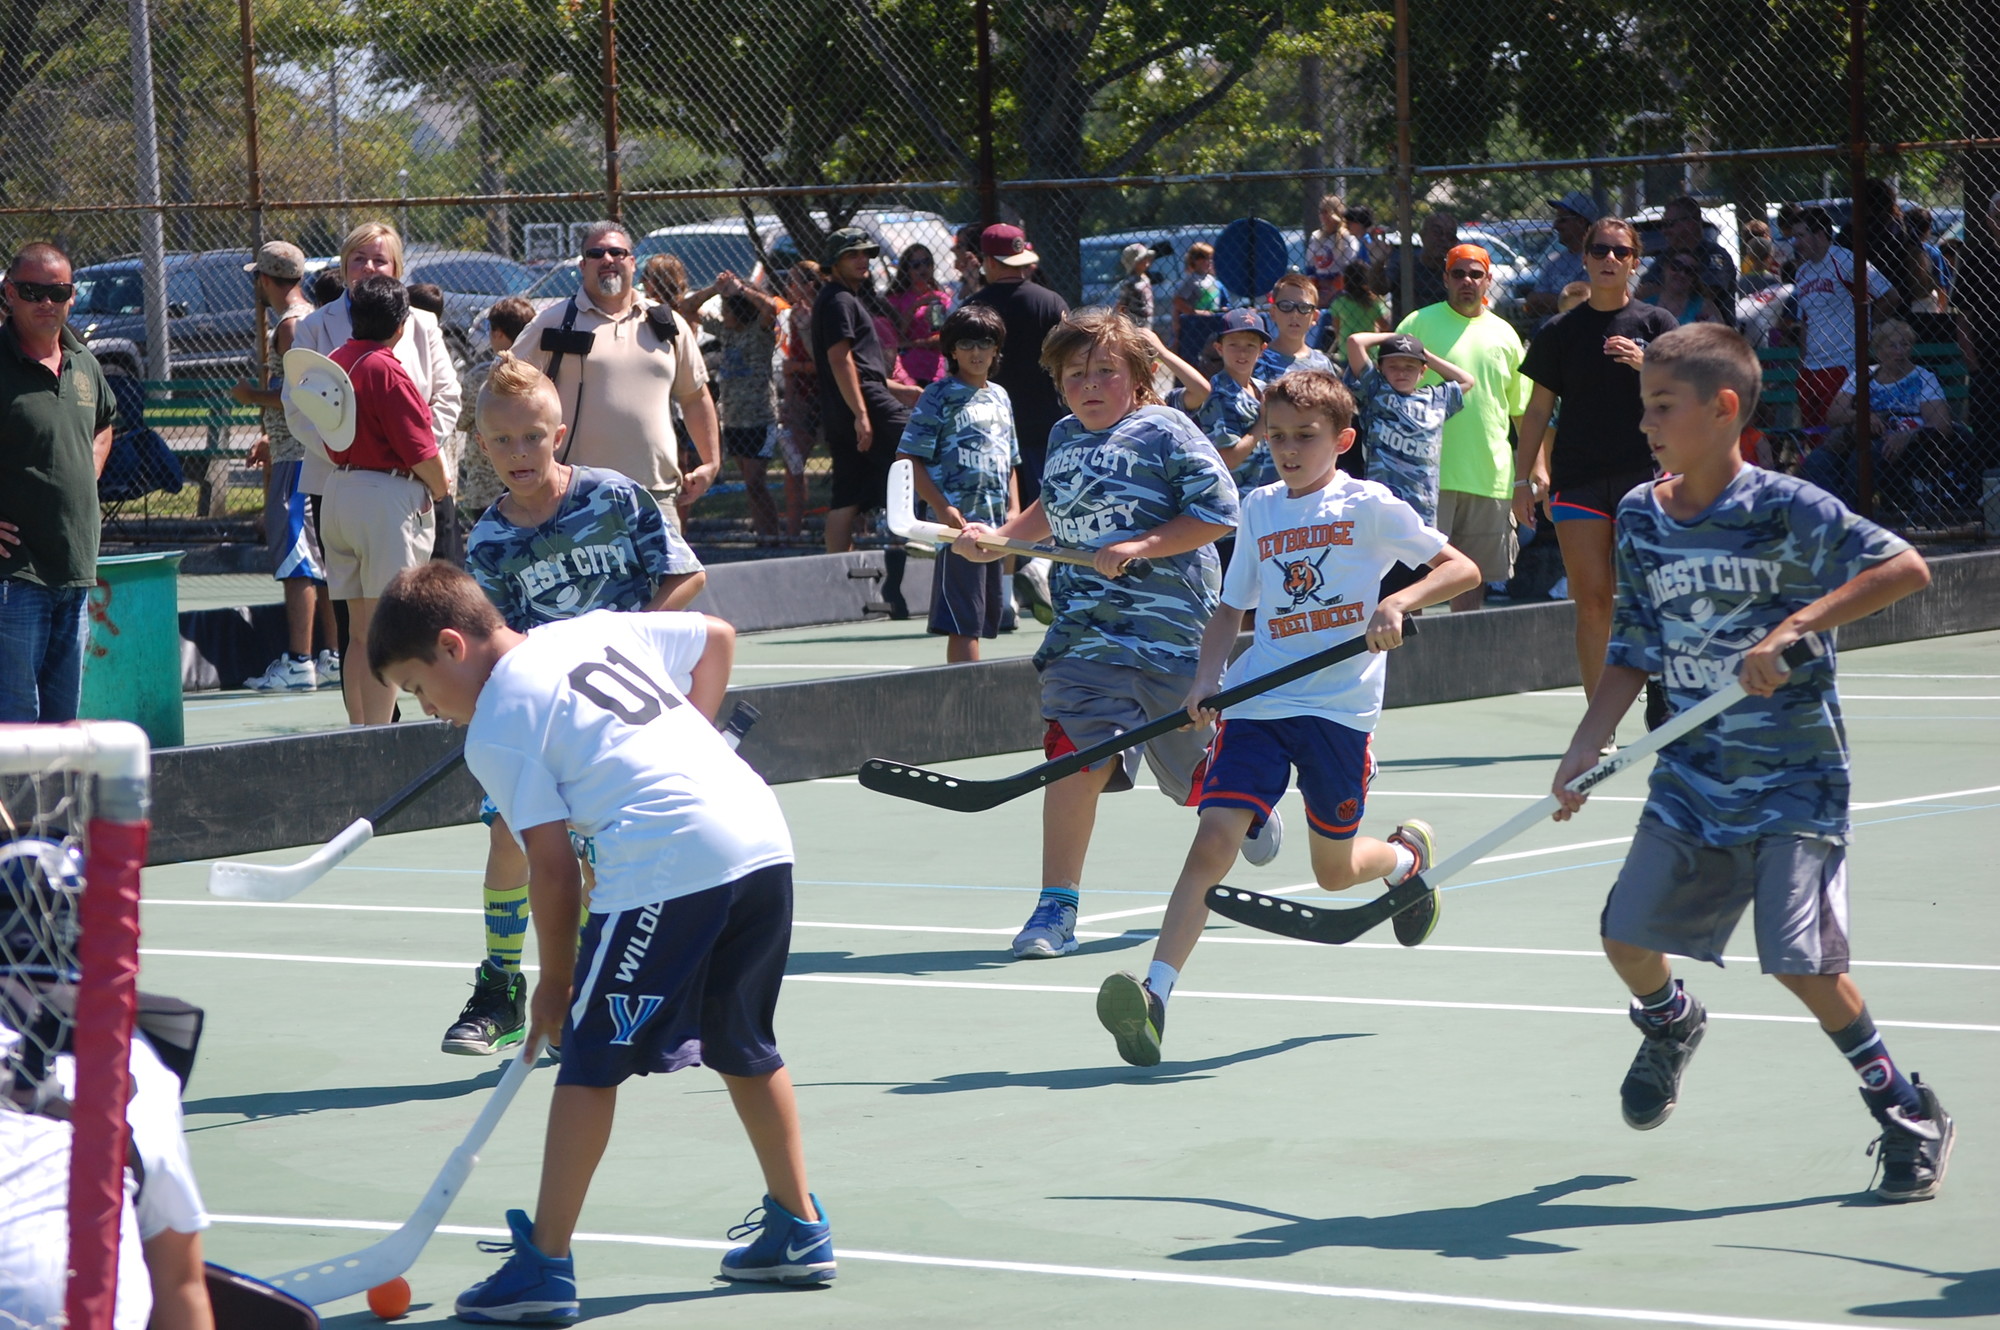 Newbridge Road Park and Forest City Park faced off in the annual street hockey tournament.